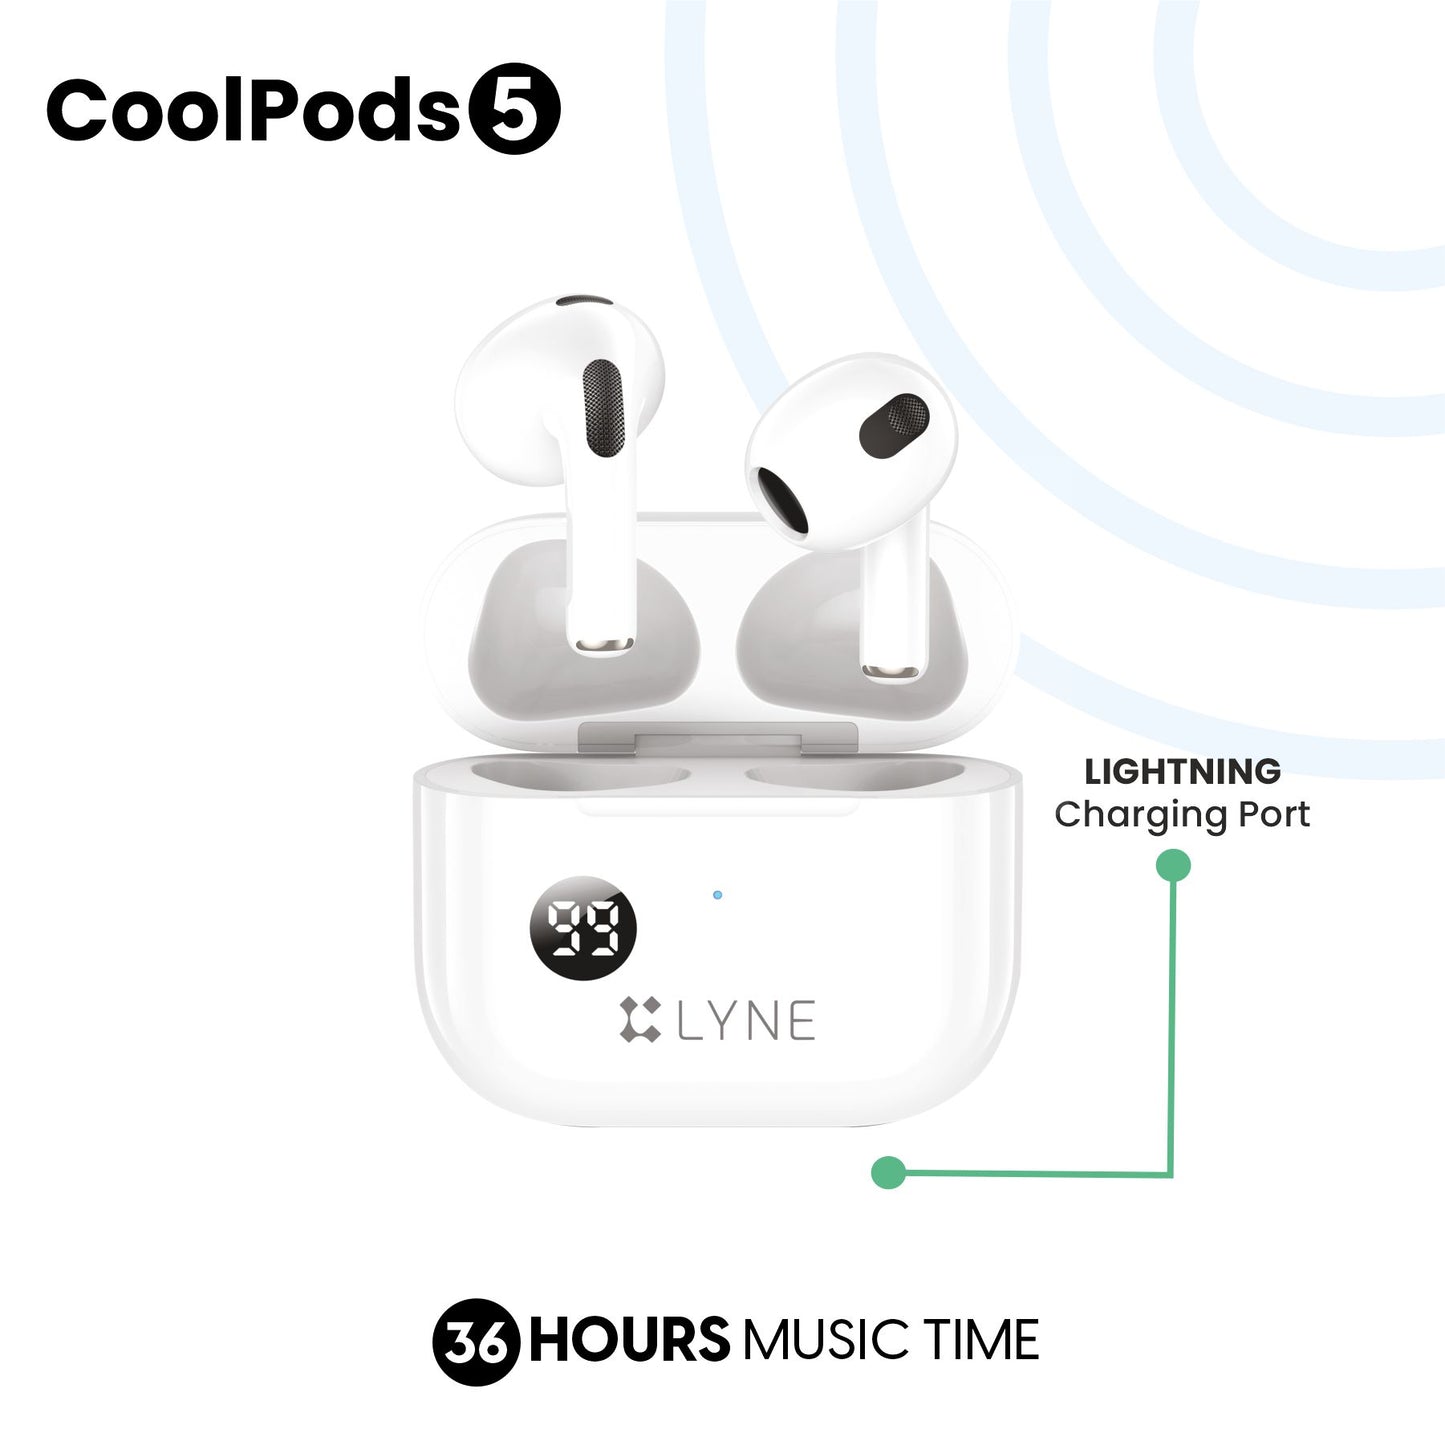 LYNE CoolPods 5 36 Hours Music Time True Wireless Earbuds with IPX4 Water Resistance